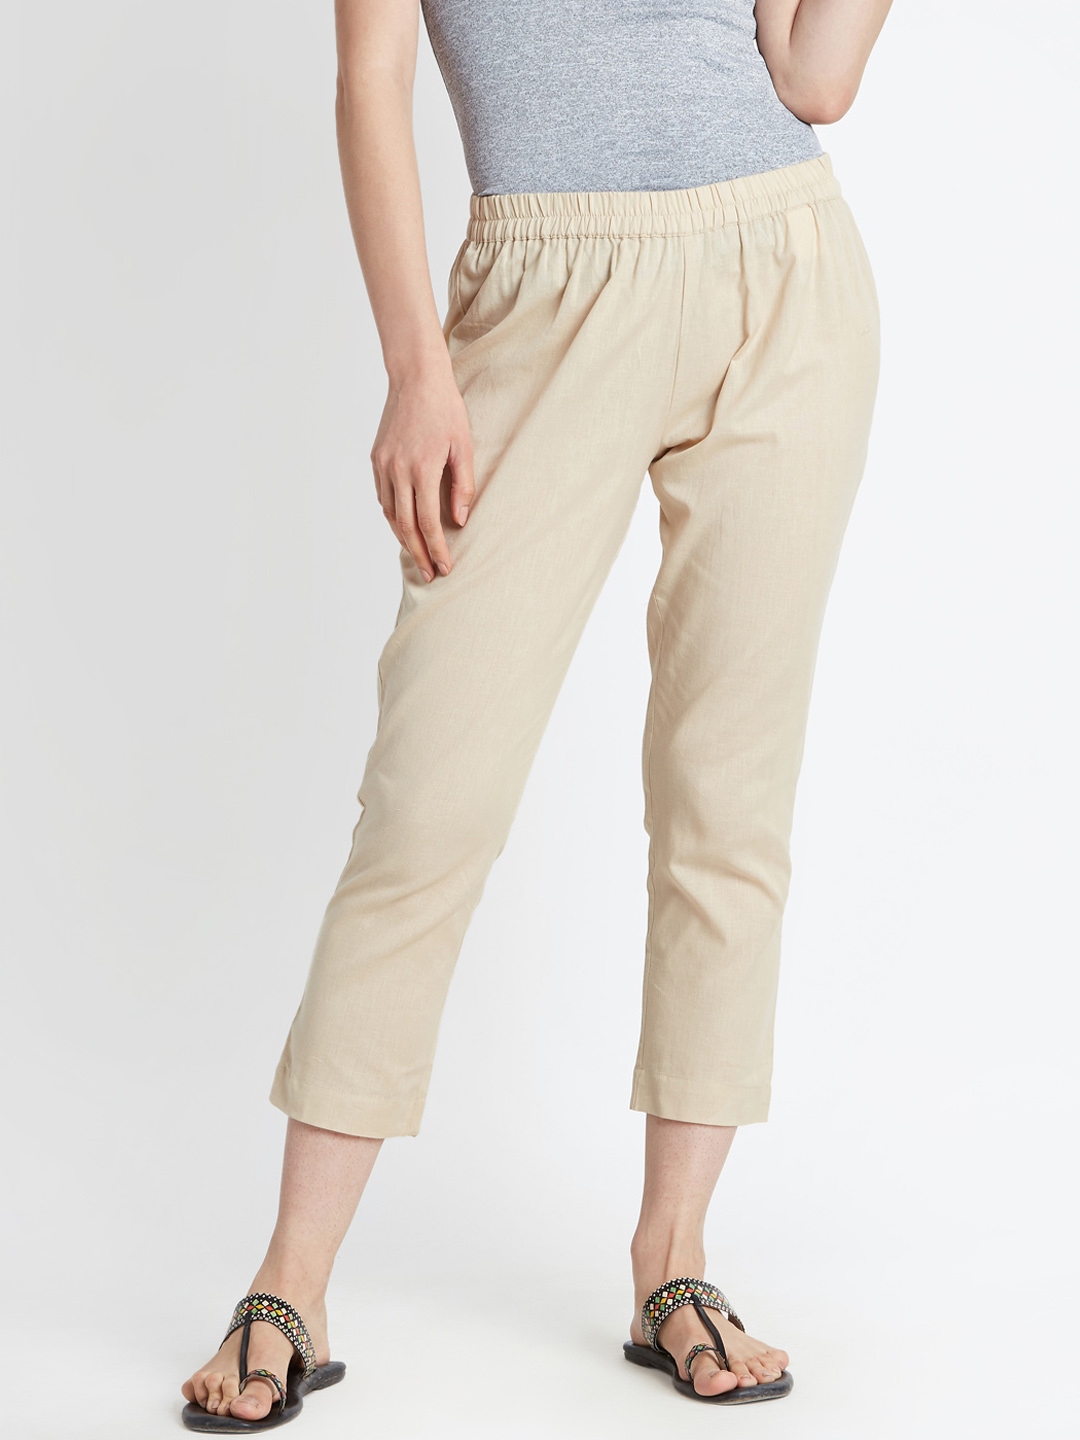 Pantaloons Trousers outlet - Women - 1800 products on sale | FASHIOLA.co.uk